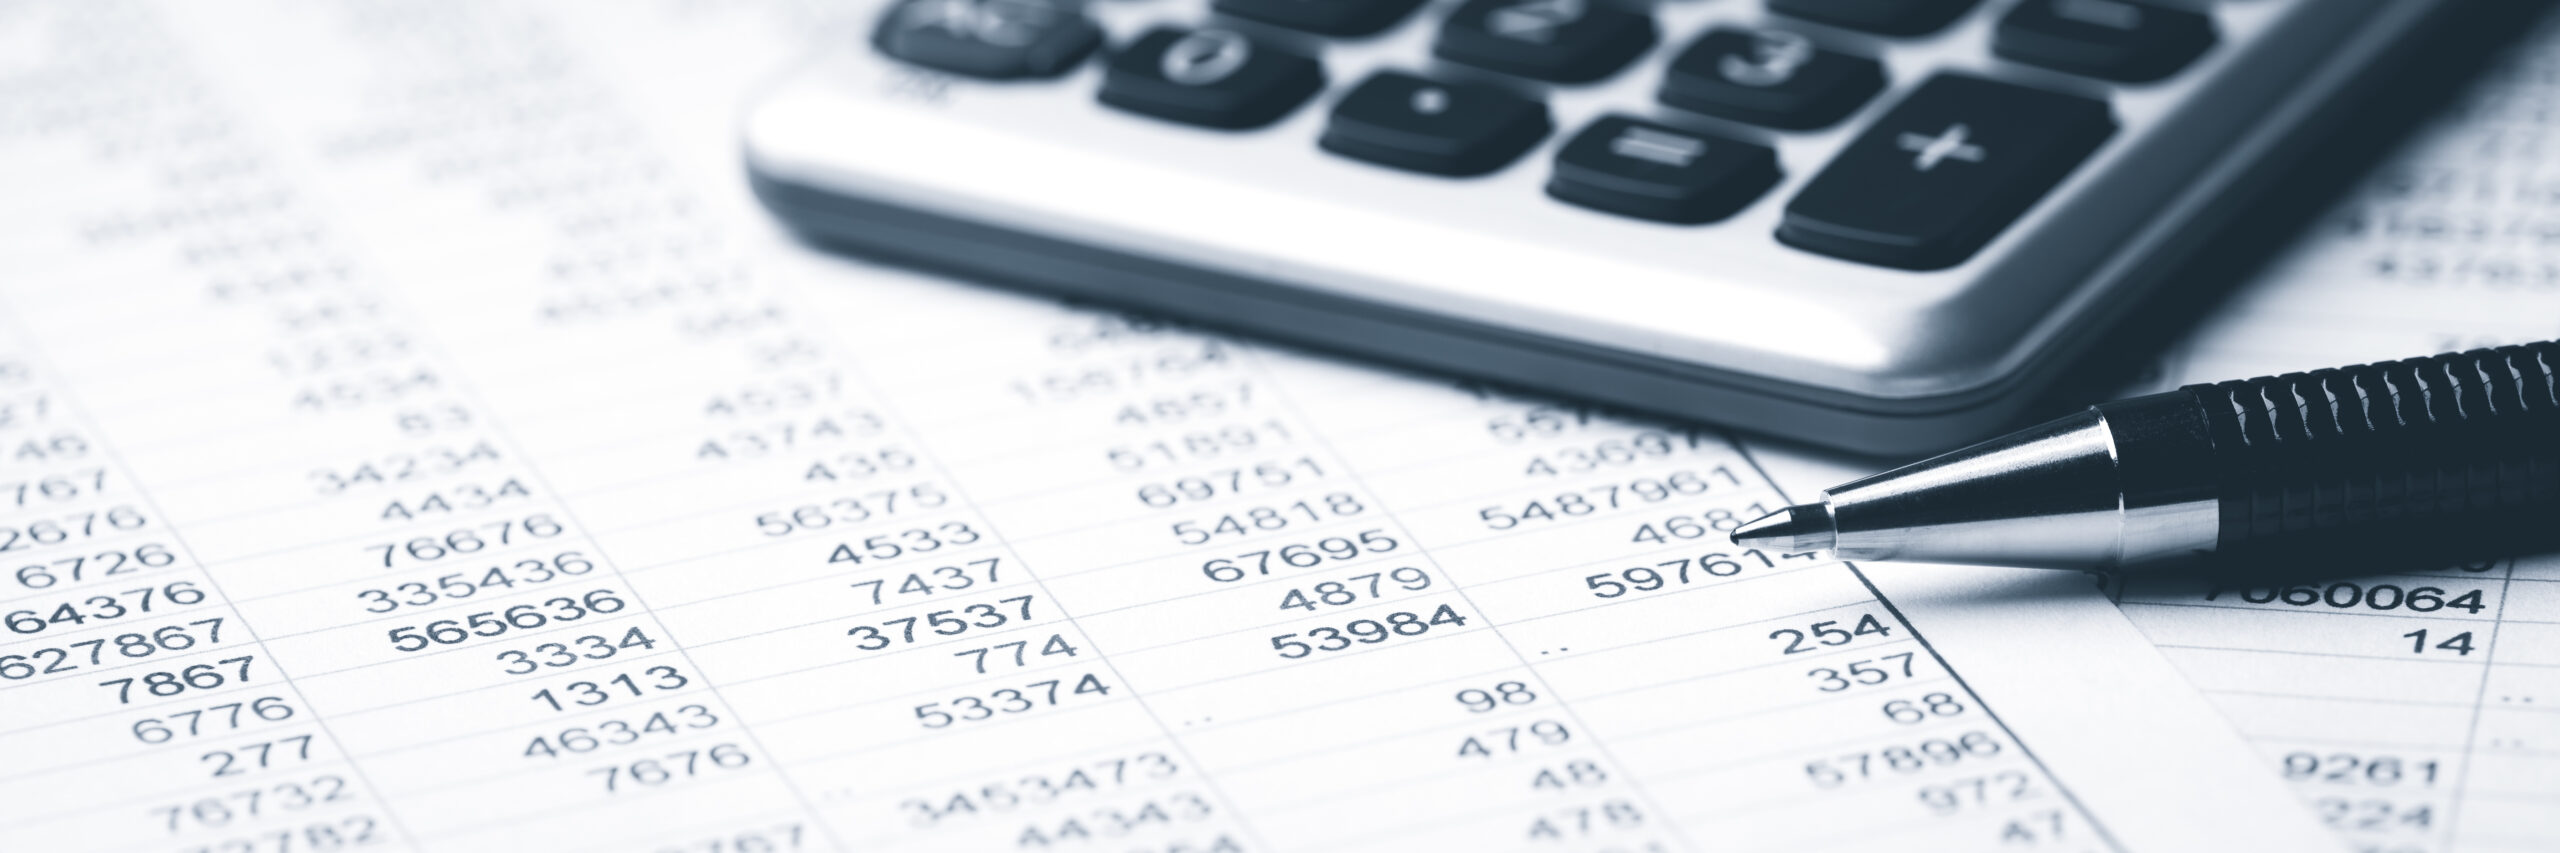 Mastering Budget Preparation and Execution: Accounting Grid, Pen, and Calculator